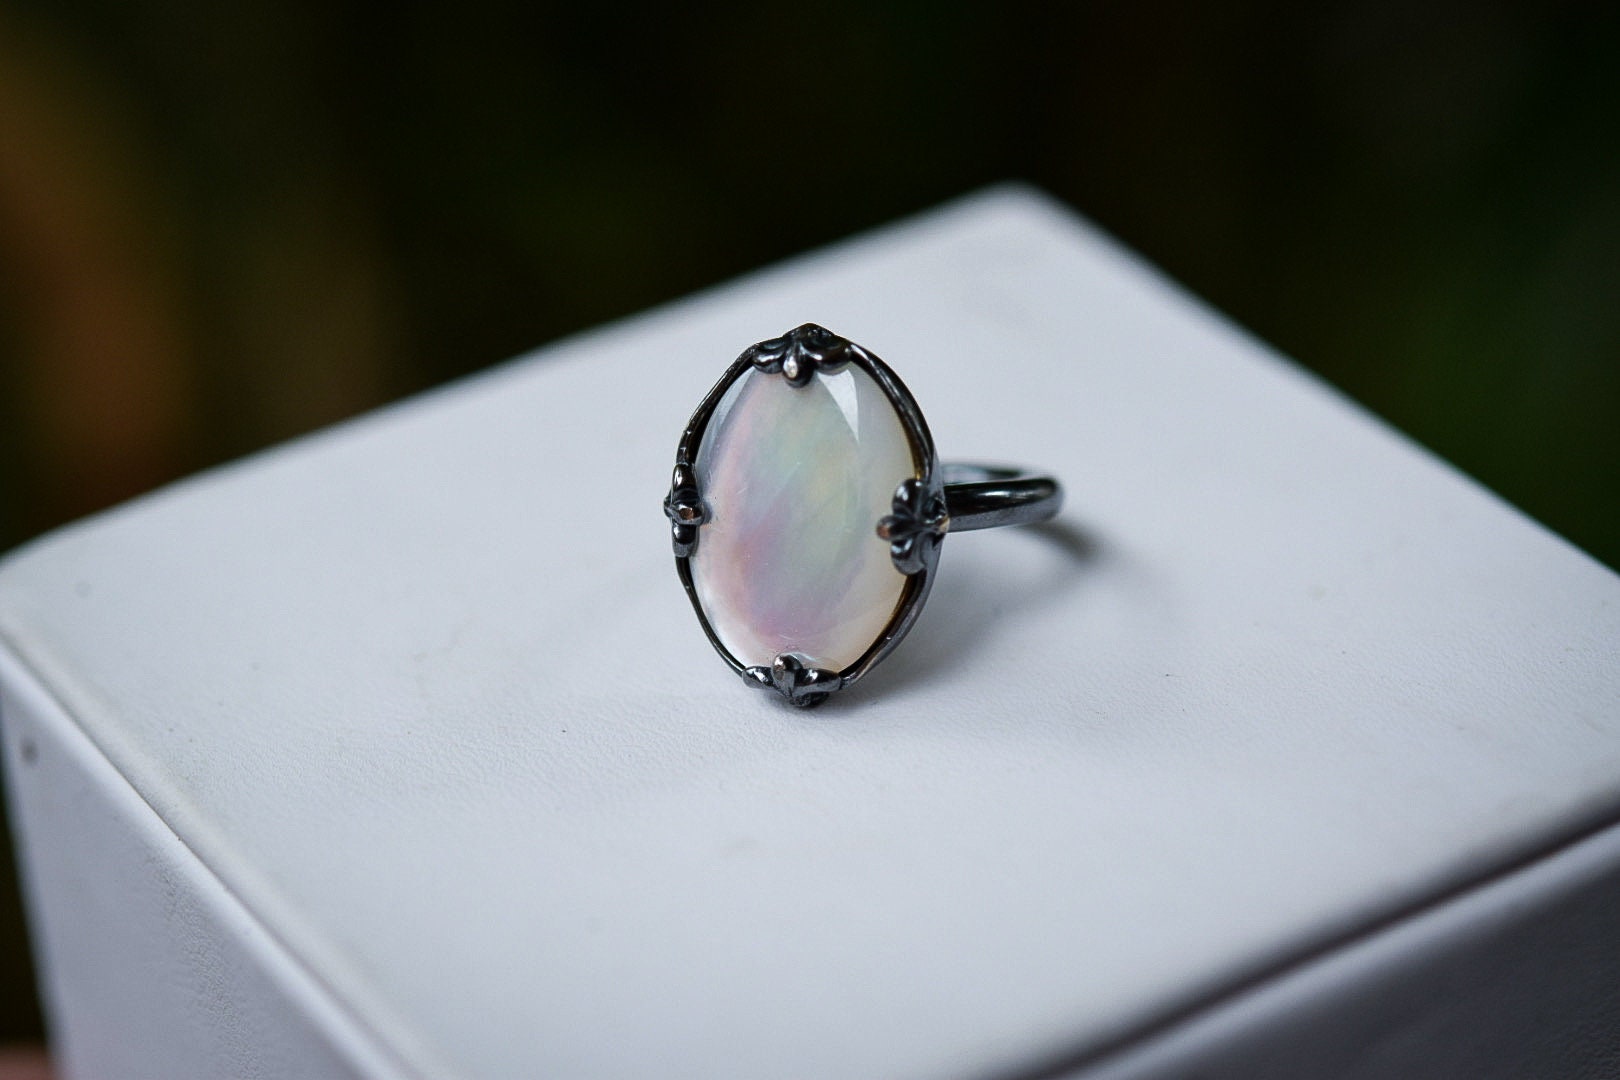 White Mother of Pearl Ring/ Sterling Silver/ Mirror, Mirror Ring/ pearlescent